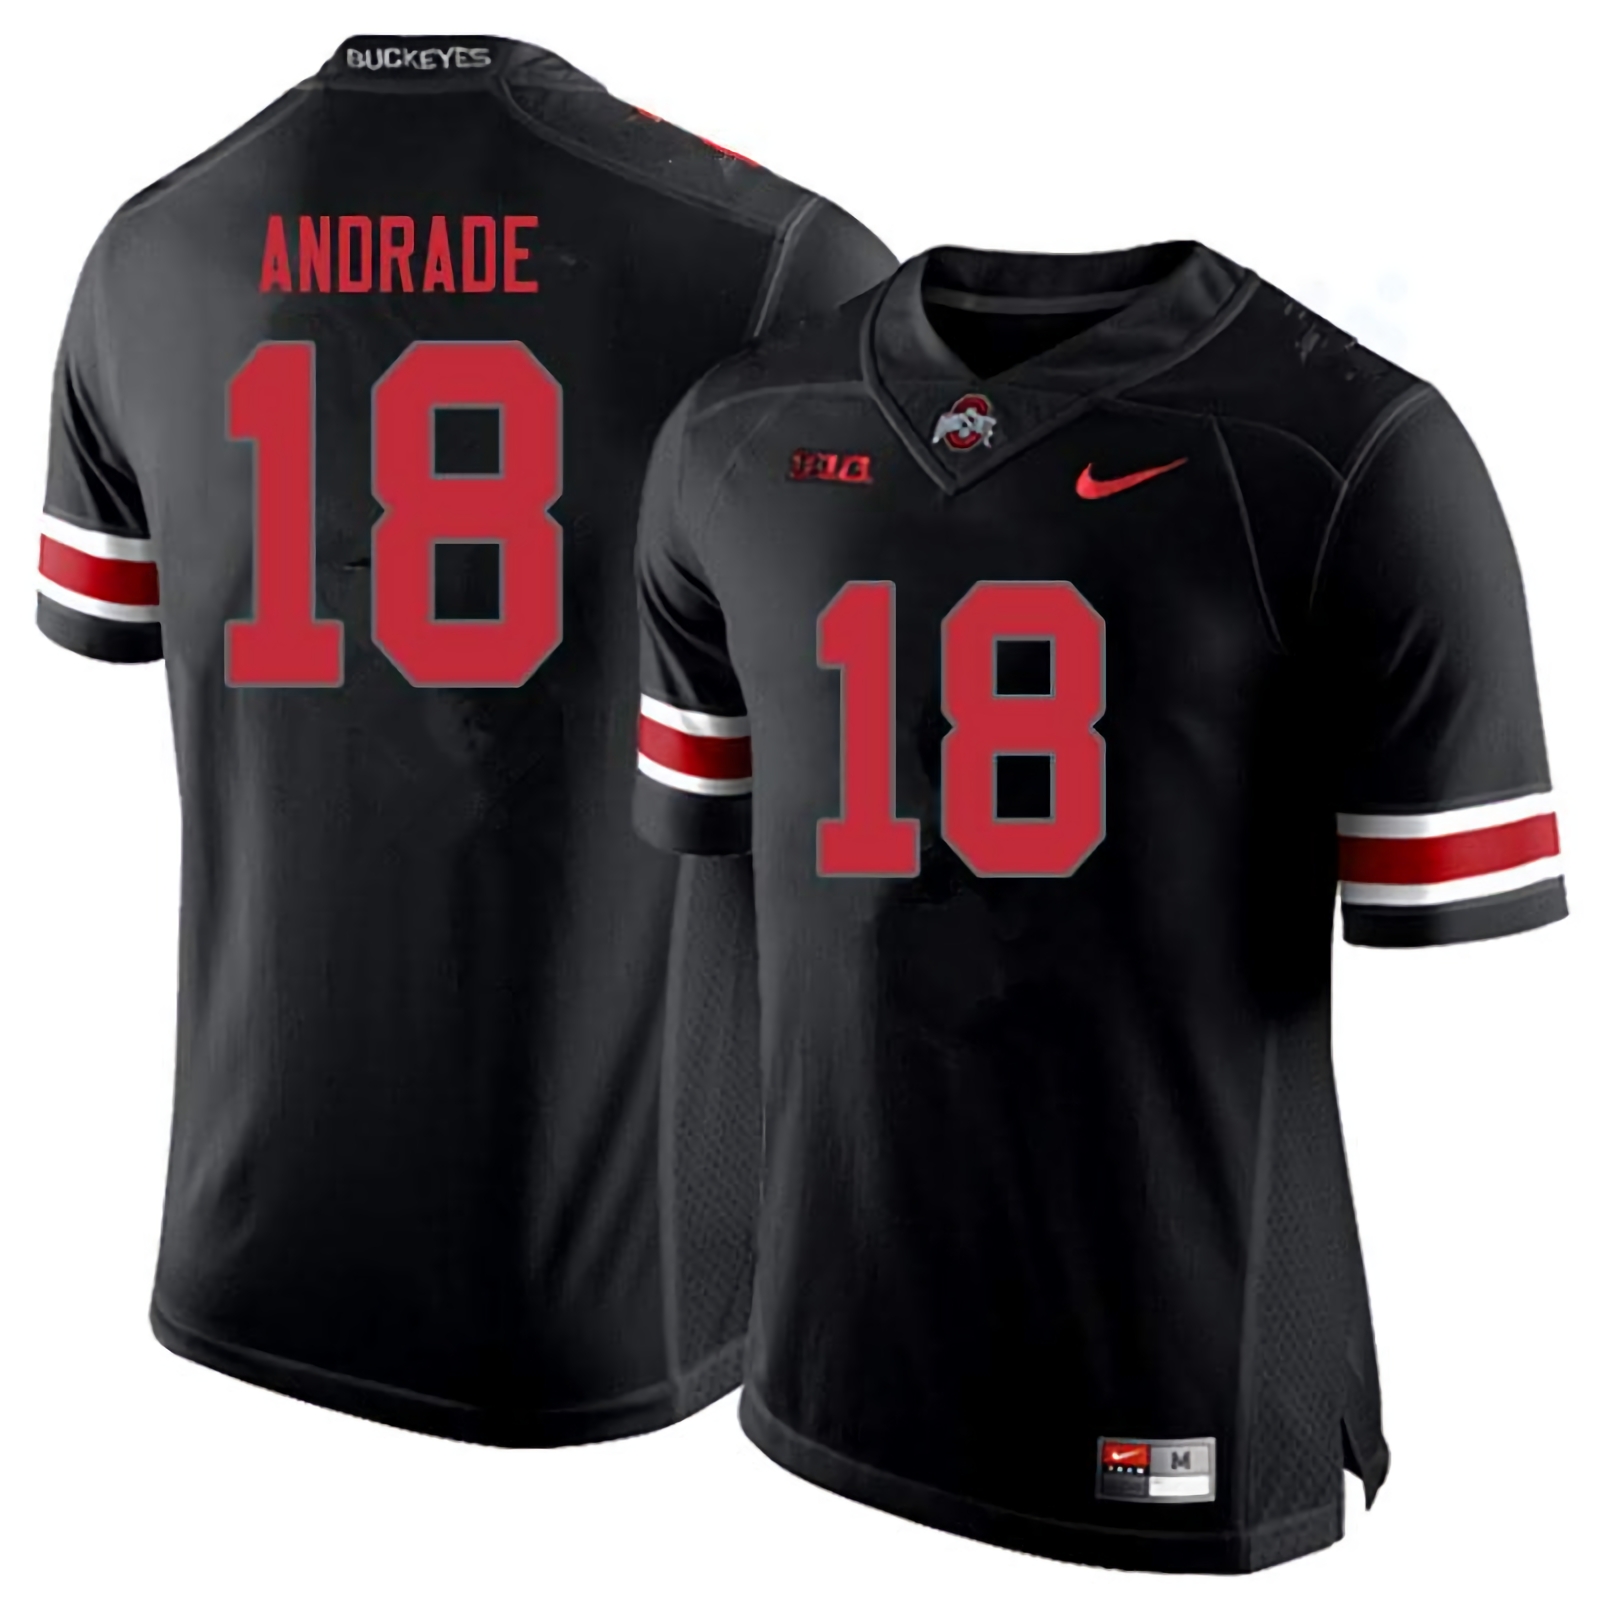 J.P. Andrade Ohio State Buckeyes Men's NCAA #18 Nike Blackout College Stitched Football Jersey LOU3556UH